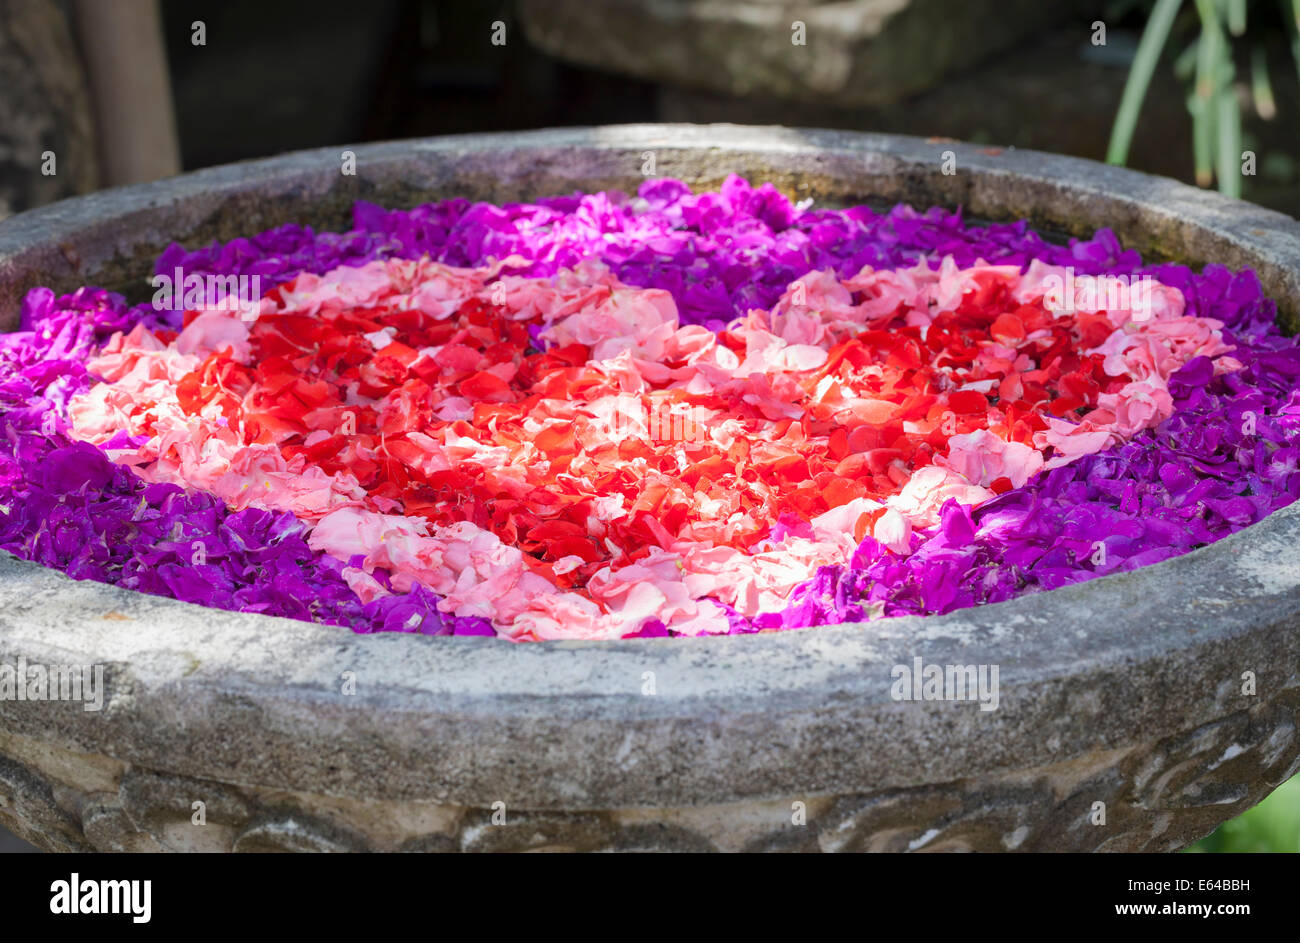 Delicate heart shaped arrangement of petals floating in a basin of water, Bali, Indonesia Stock Photo